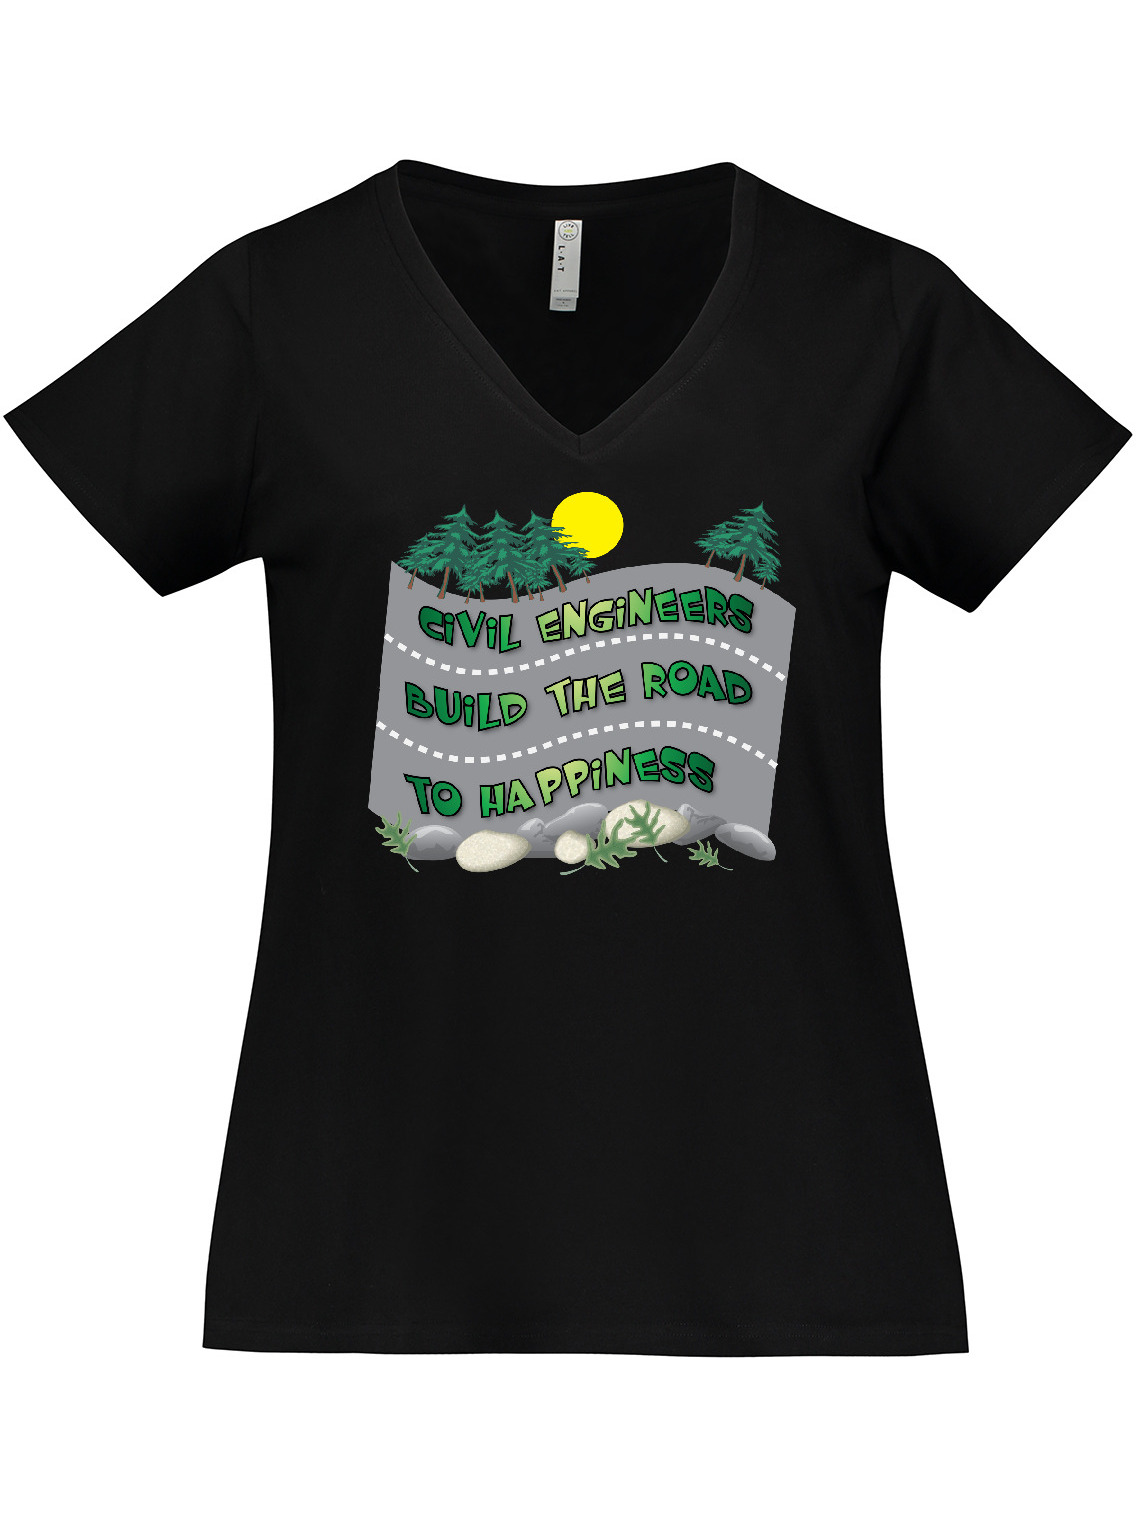 Inktastic Civil Engineers Road To Happiness Women's Plus Size V-Neck T-Shirt - image 1 of 4